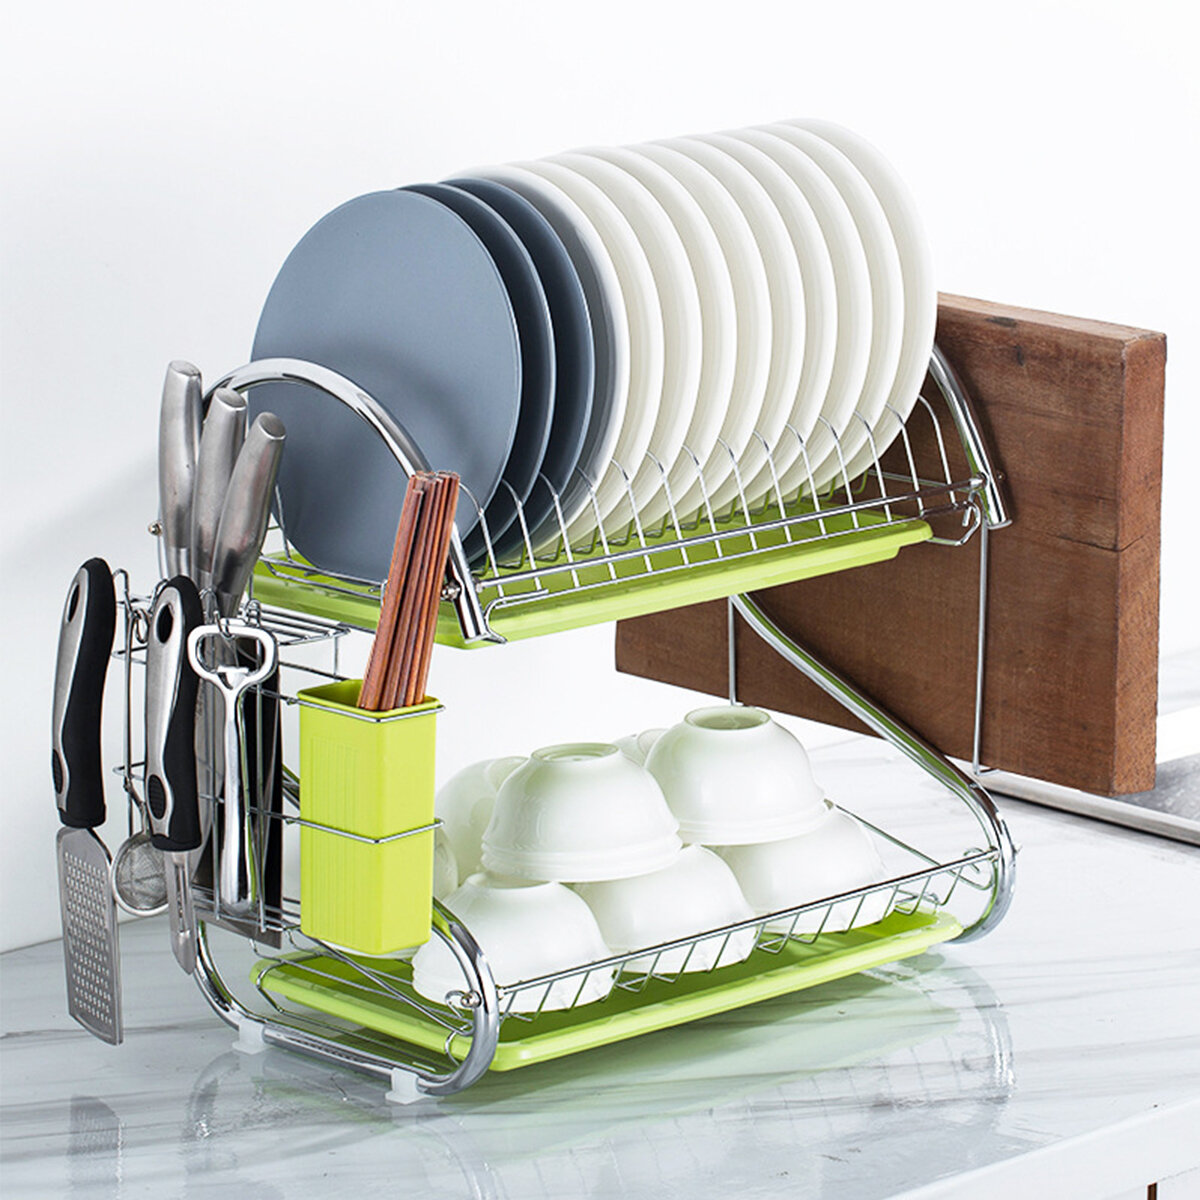 Image of Bakeey Organizer Holder Stainless Steel Cutlery Dish Cup Kitchen Organizer Drying Rack Holder Dryer 2 Tiers Drainer Tray